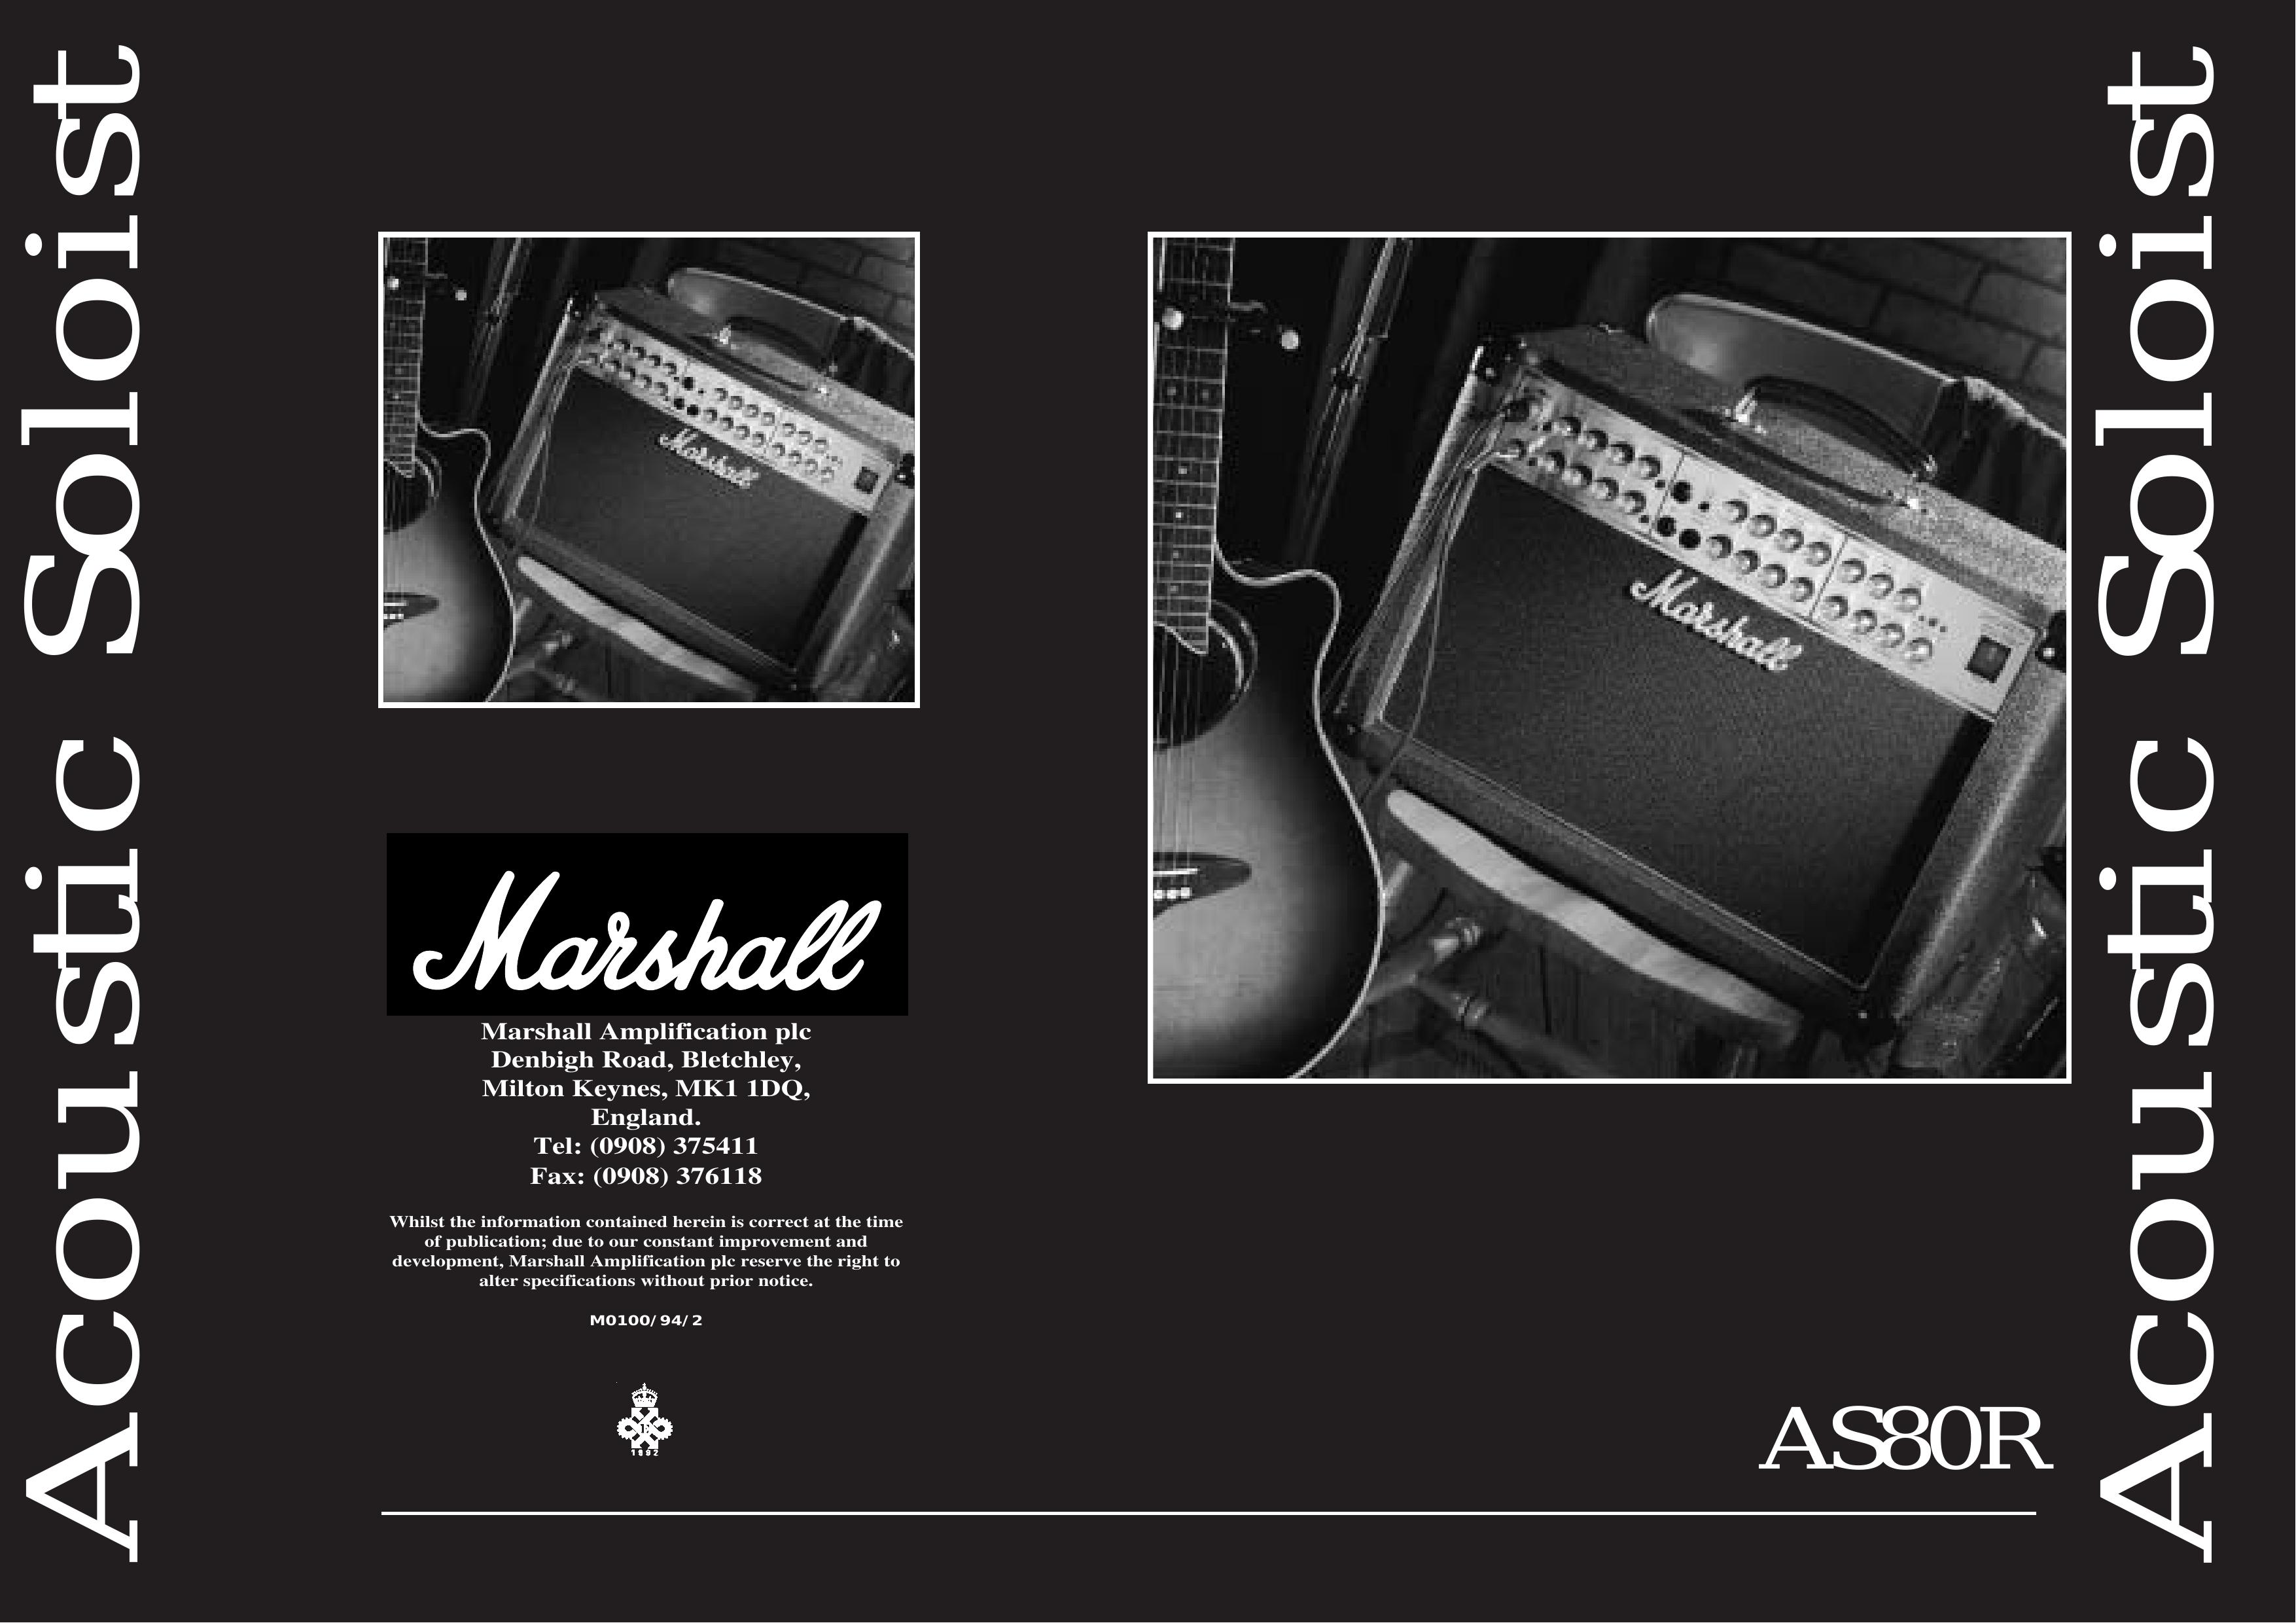 Marshall Amplification AS80R Musical Instrument Amplifier User Manual